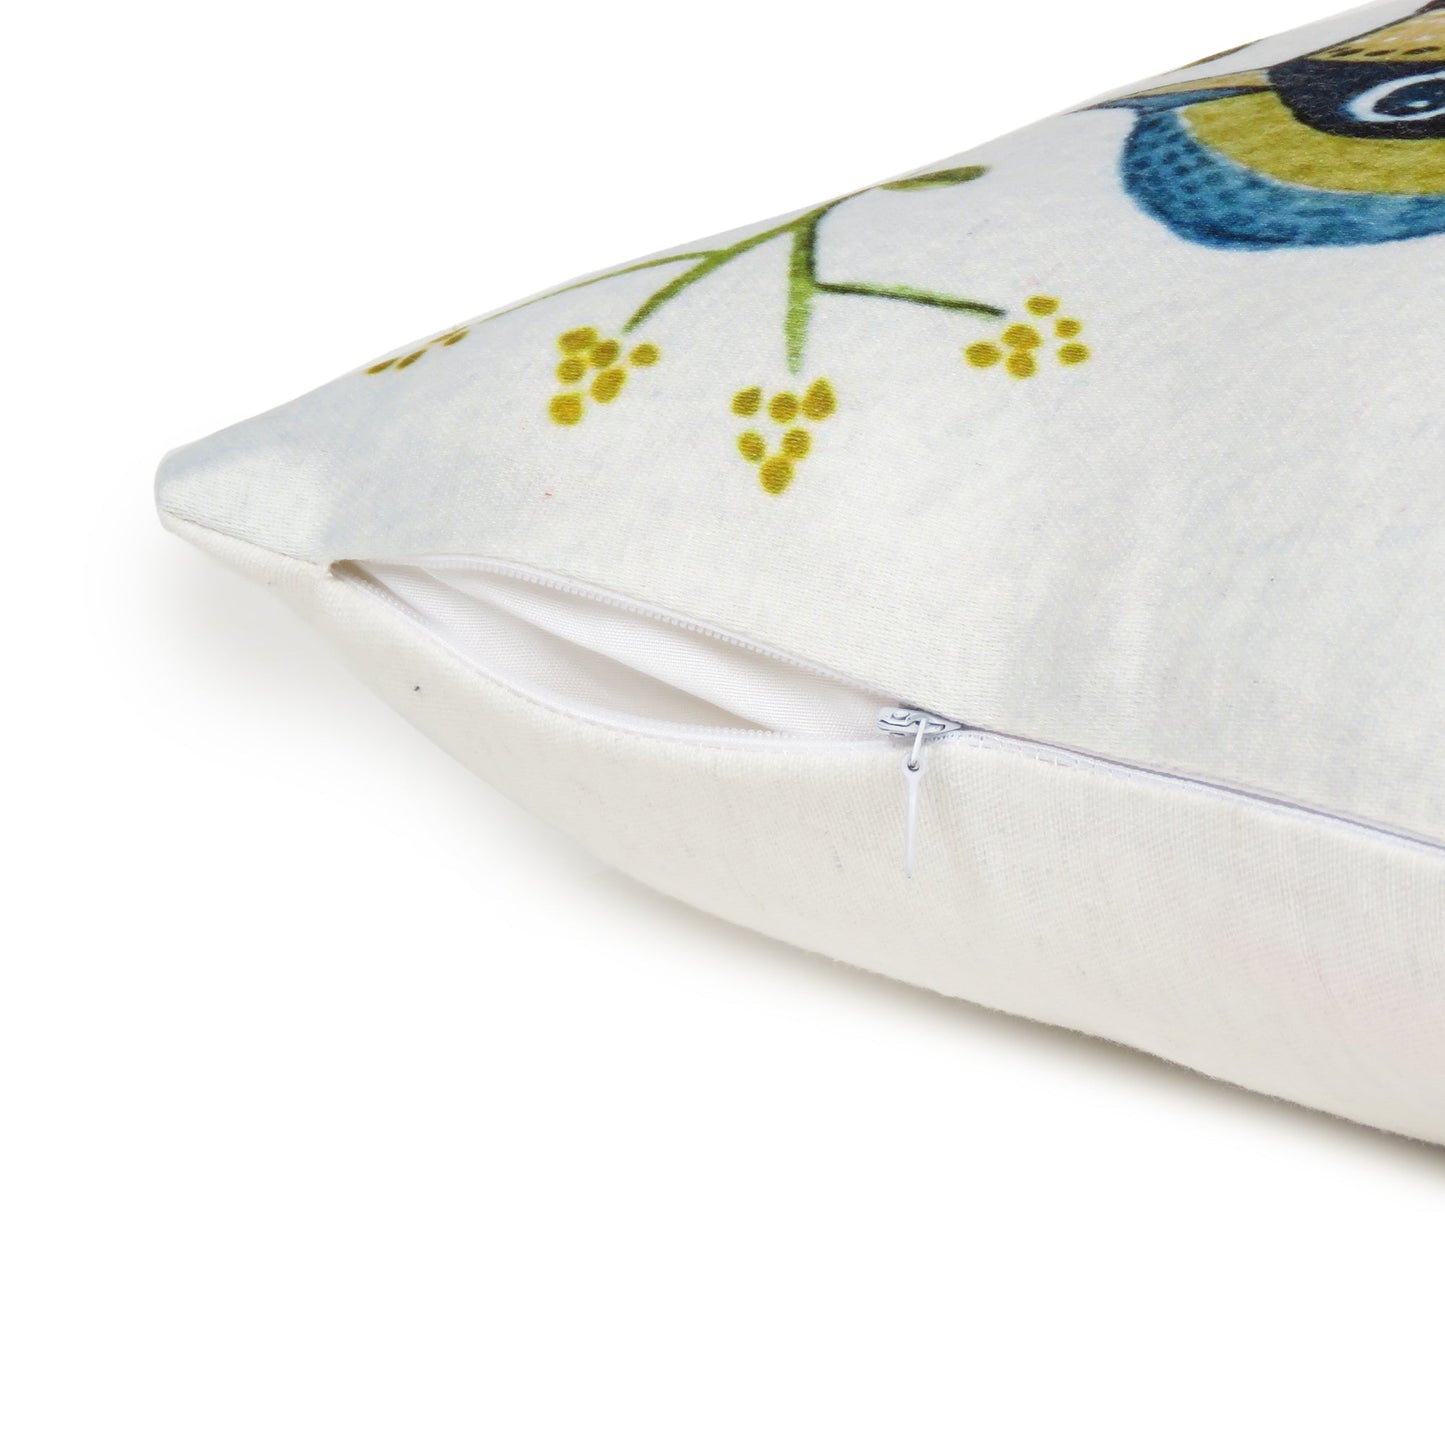 Yellow Leaf & Bird Printed Cushion Cover in Set of 2